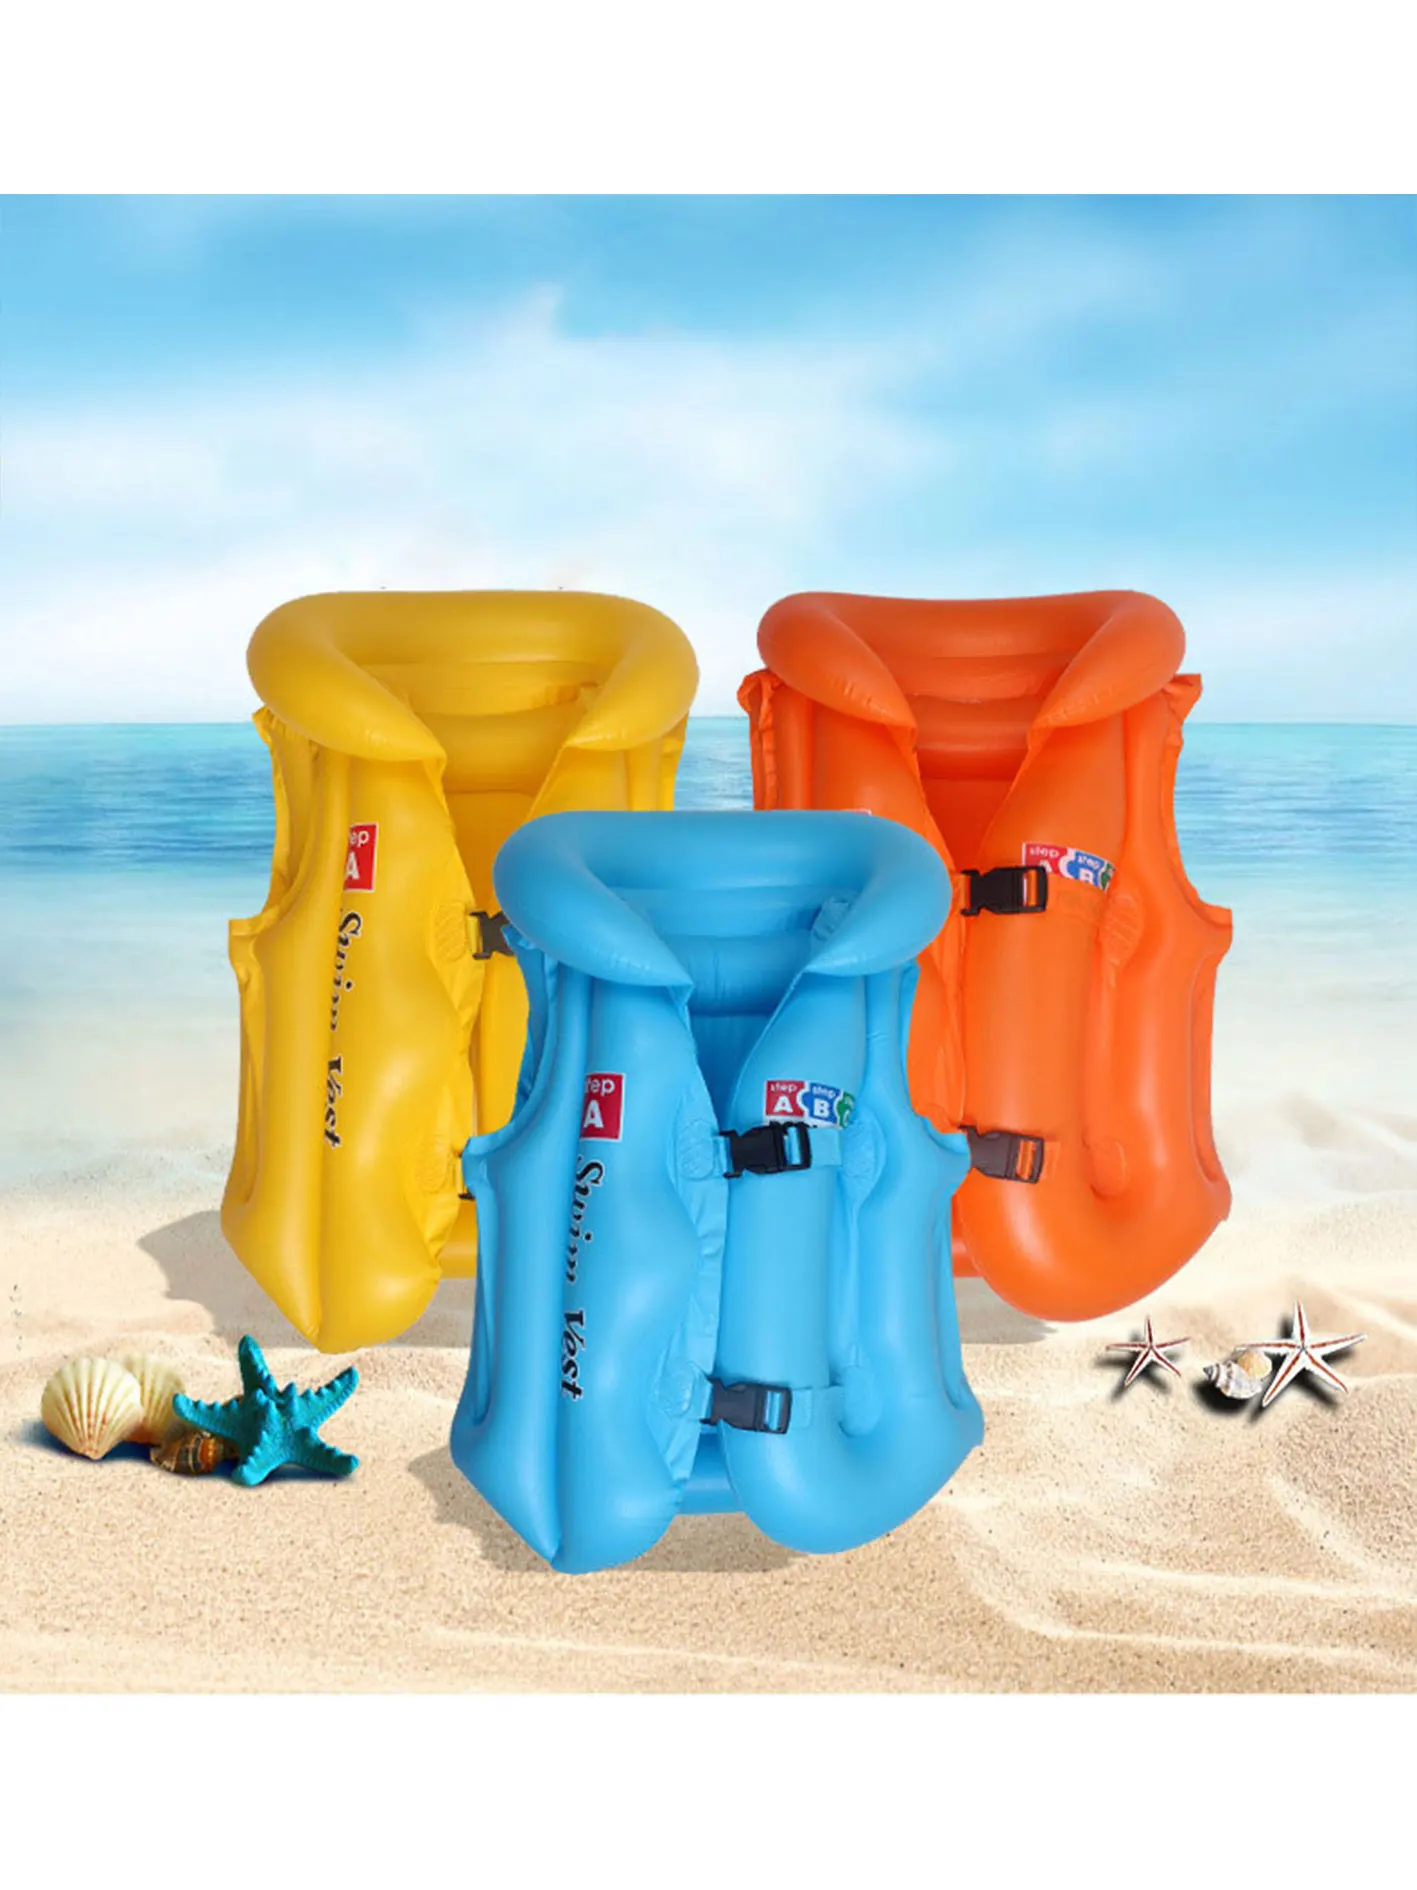 Kids Simple Atmosphere Life Jackets Inflatable Children Swimwear For Water Sport Boating Swimming Pool Accessories